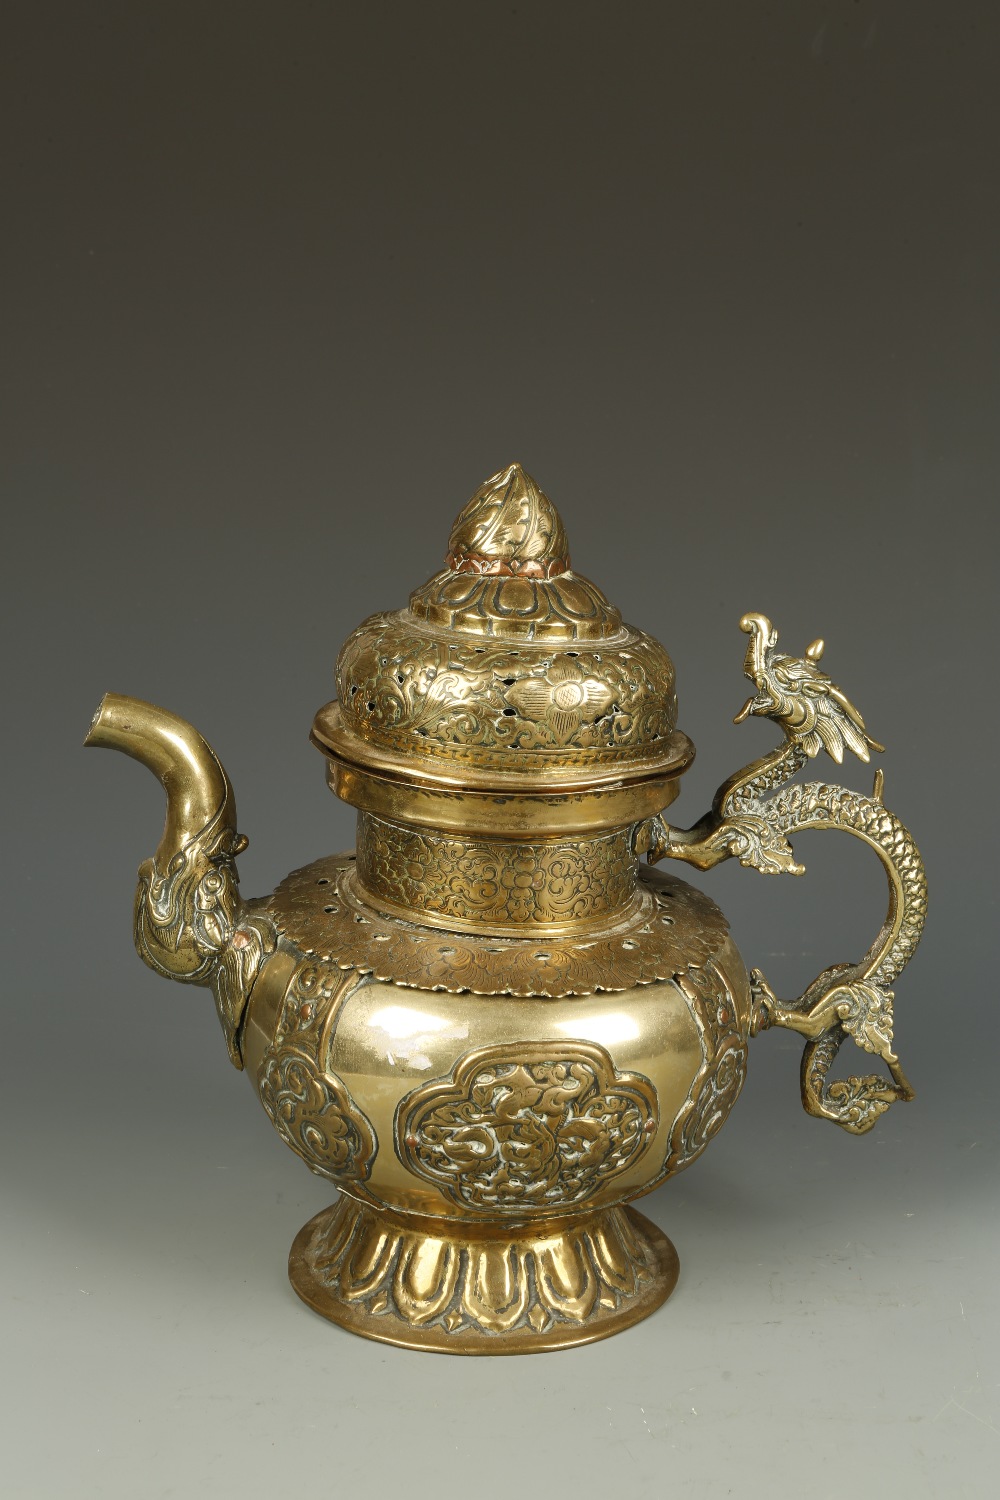 A TIBETAN COPPER AND BRASS RITUAL EWER, with a dragon handle and mask spout, the body with panels